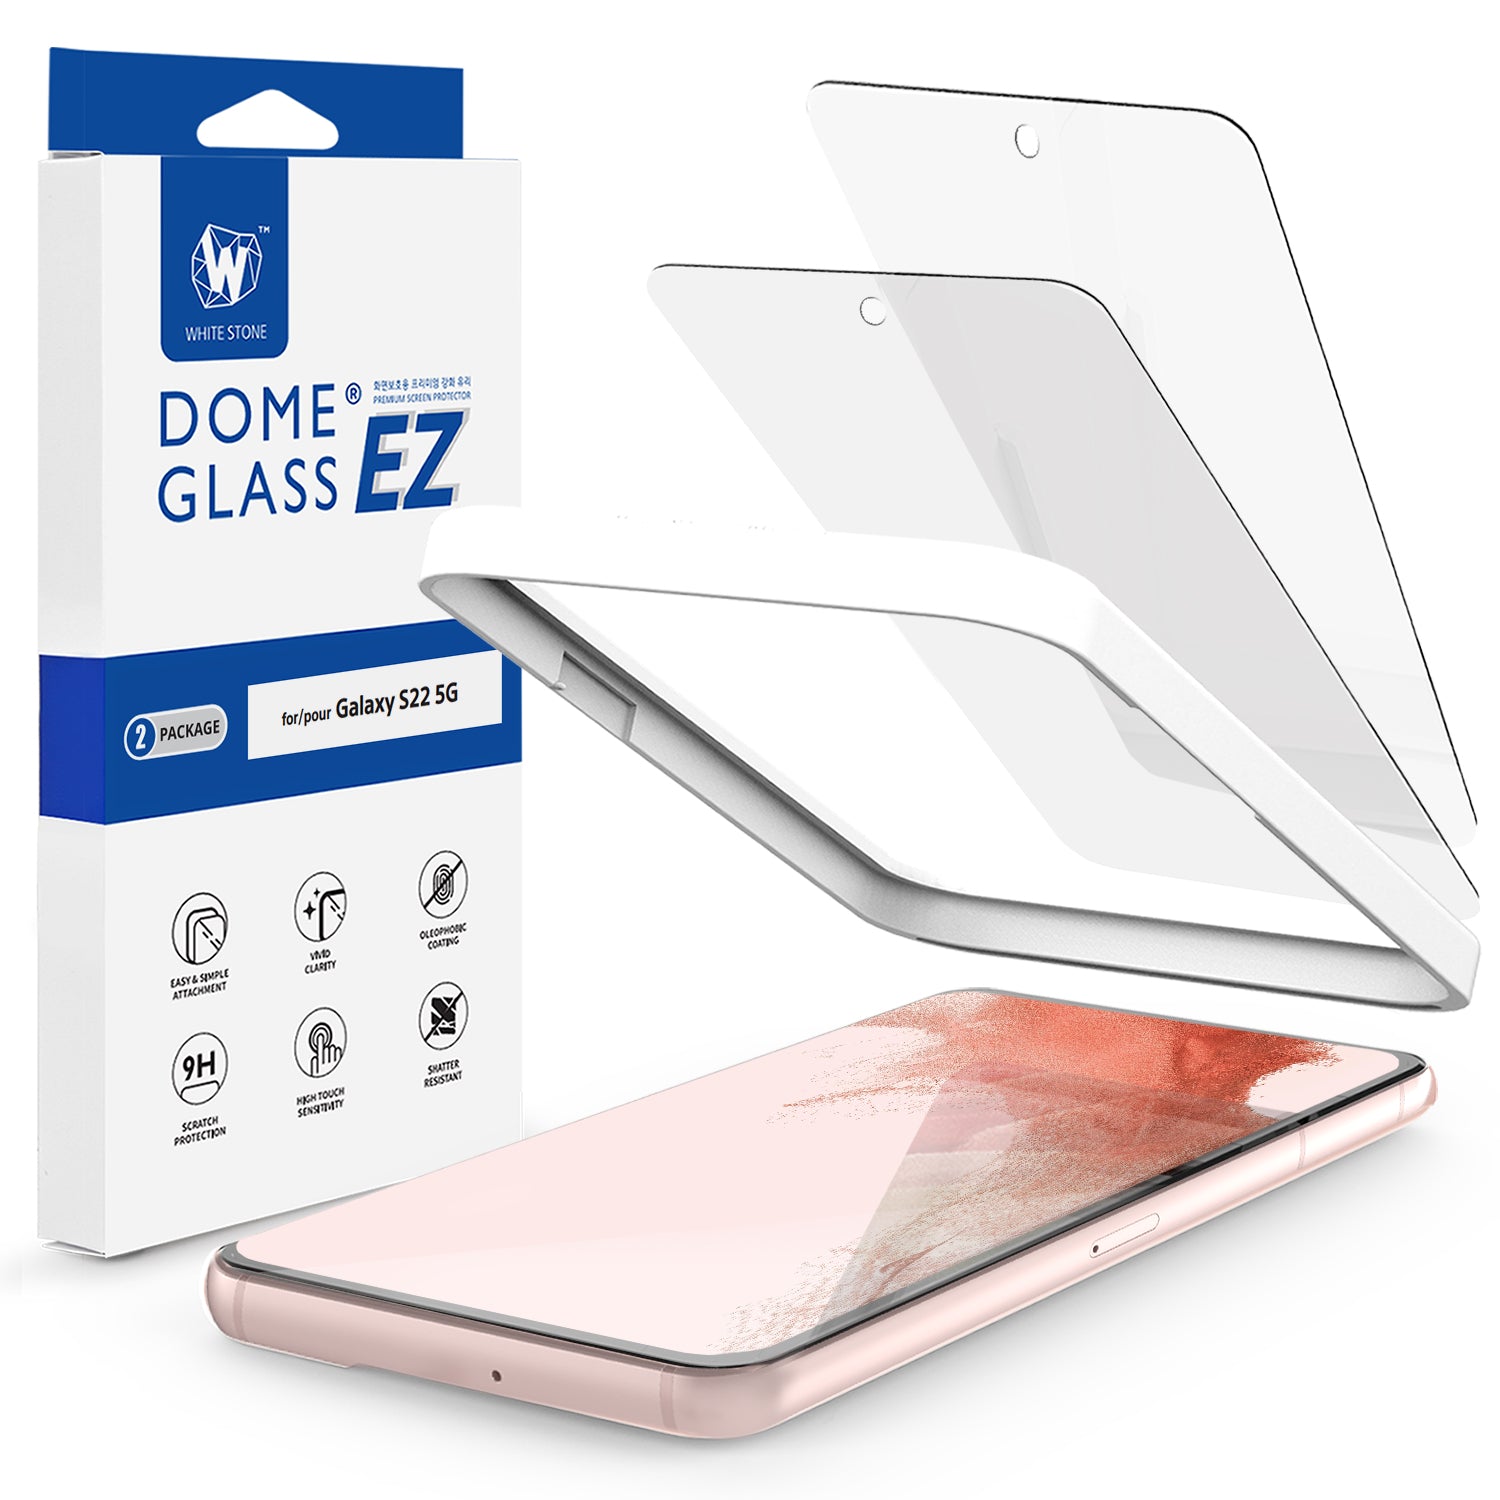 EZ] Samsung Galaxy S22 EZ Tempered Glass Screen Protector - 2Pack